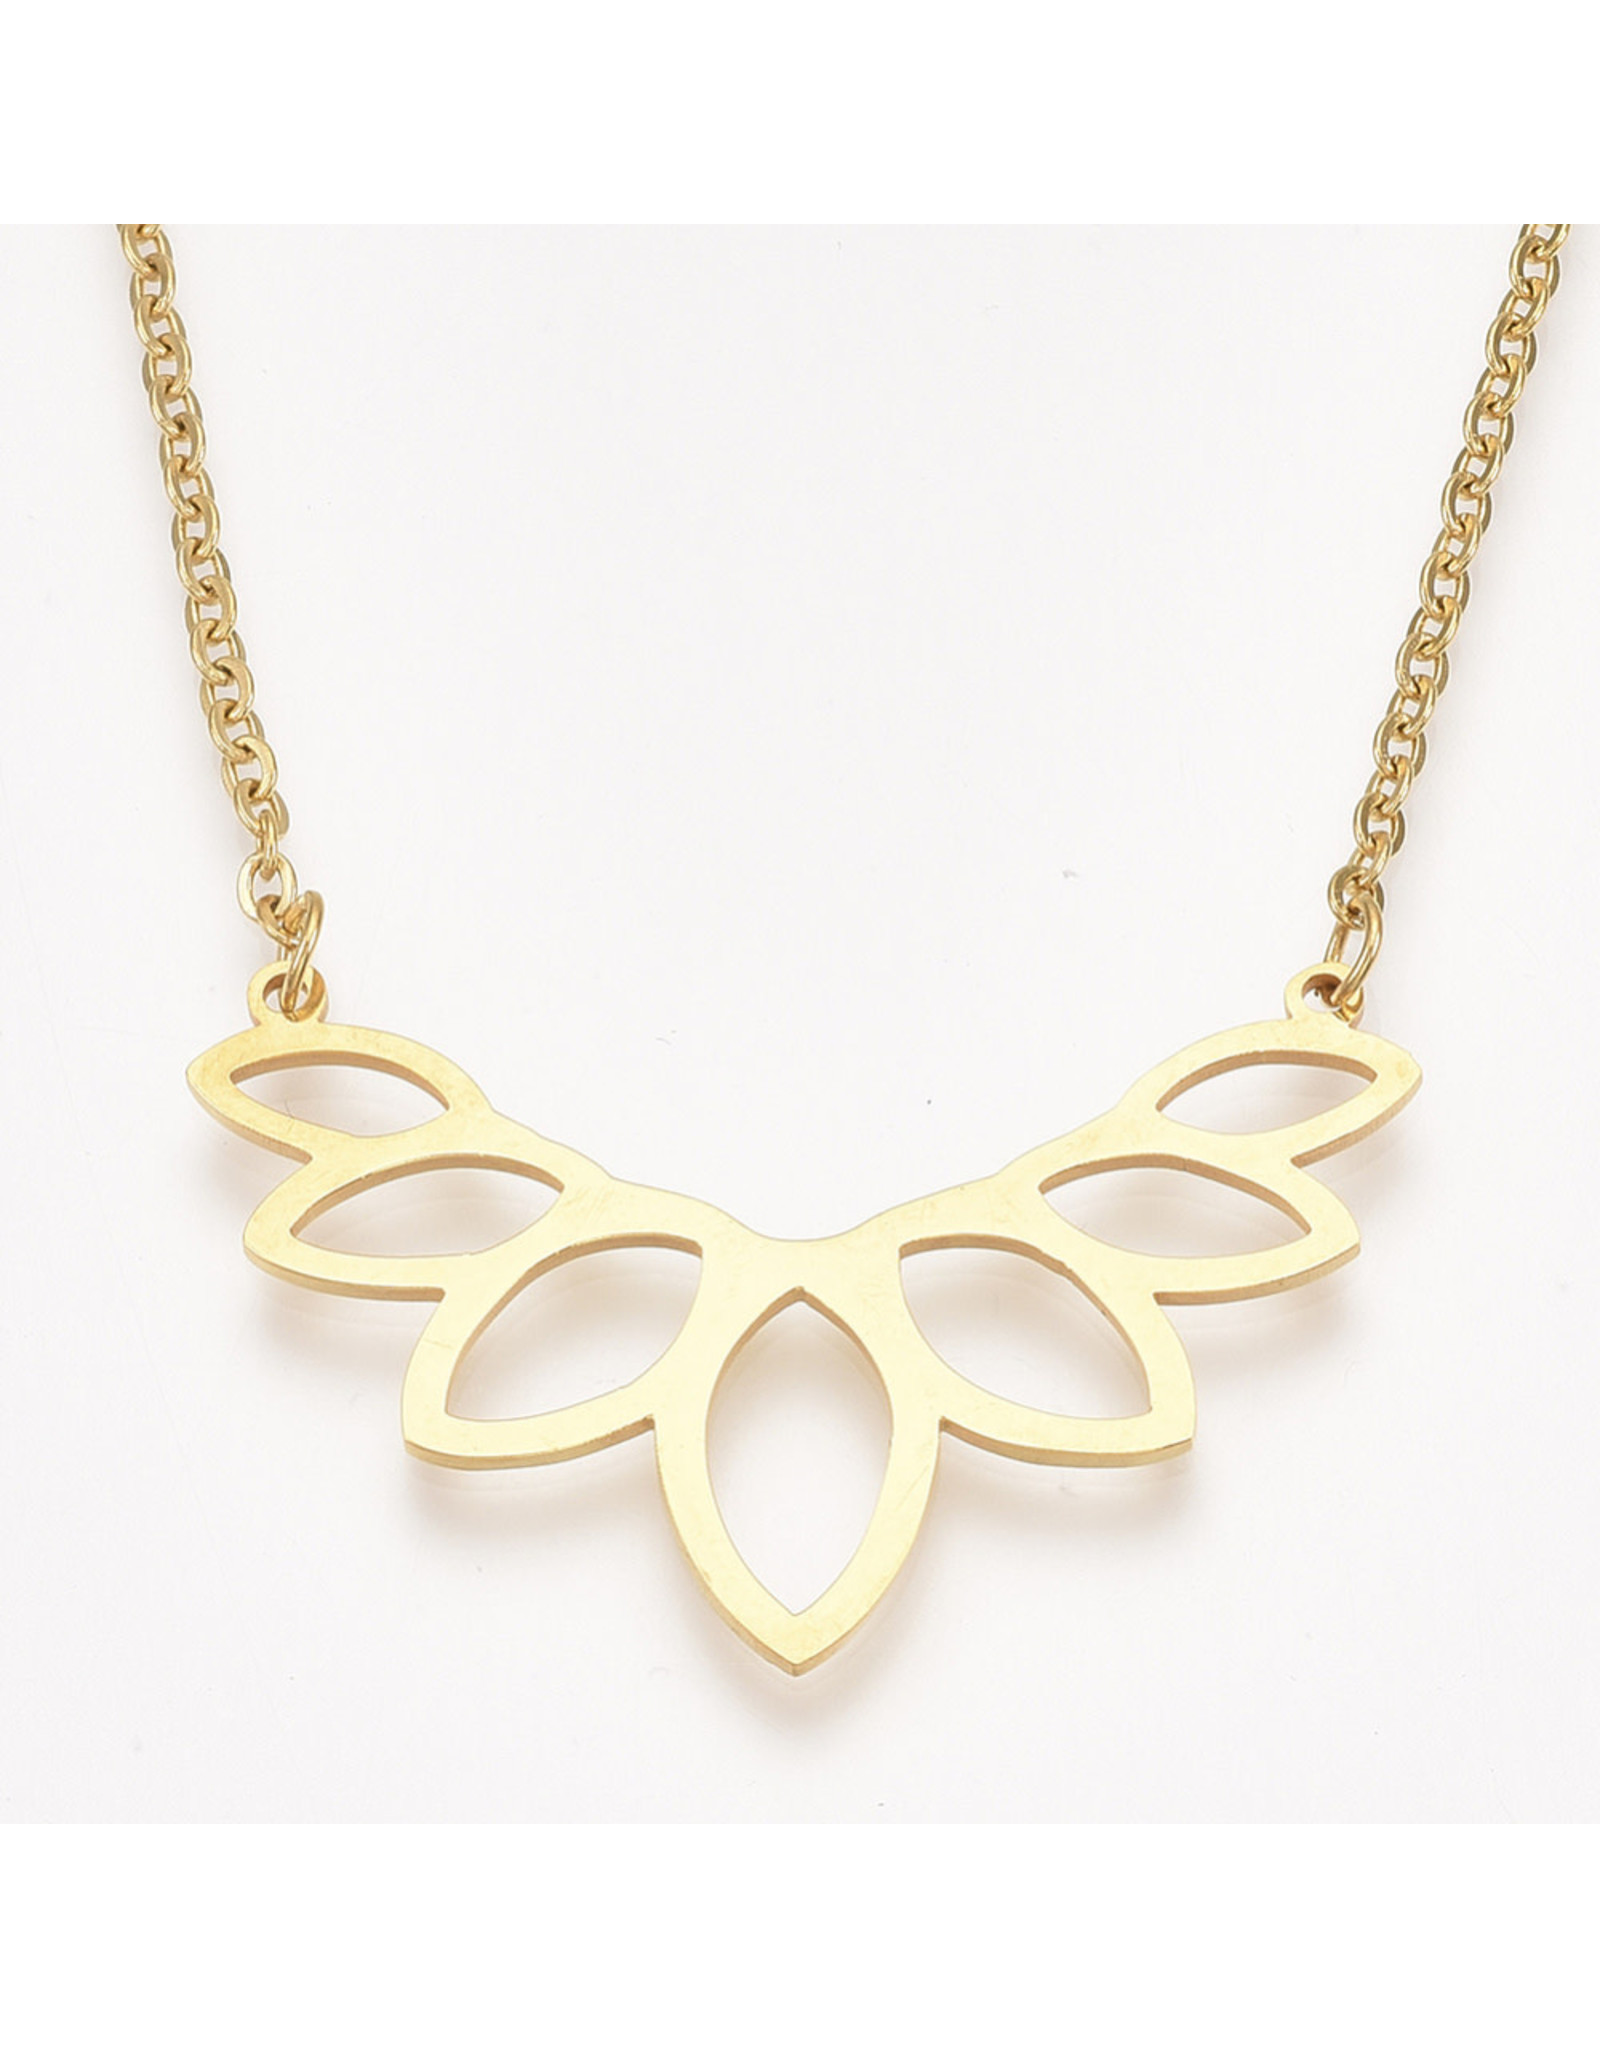 Lotus  Necklace Gold Stainless Steel   25x40mm  18'' x1